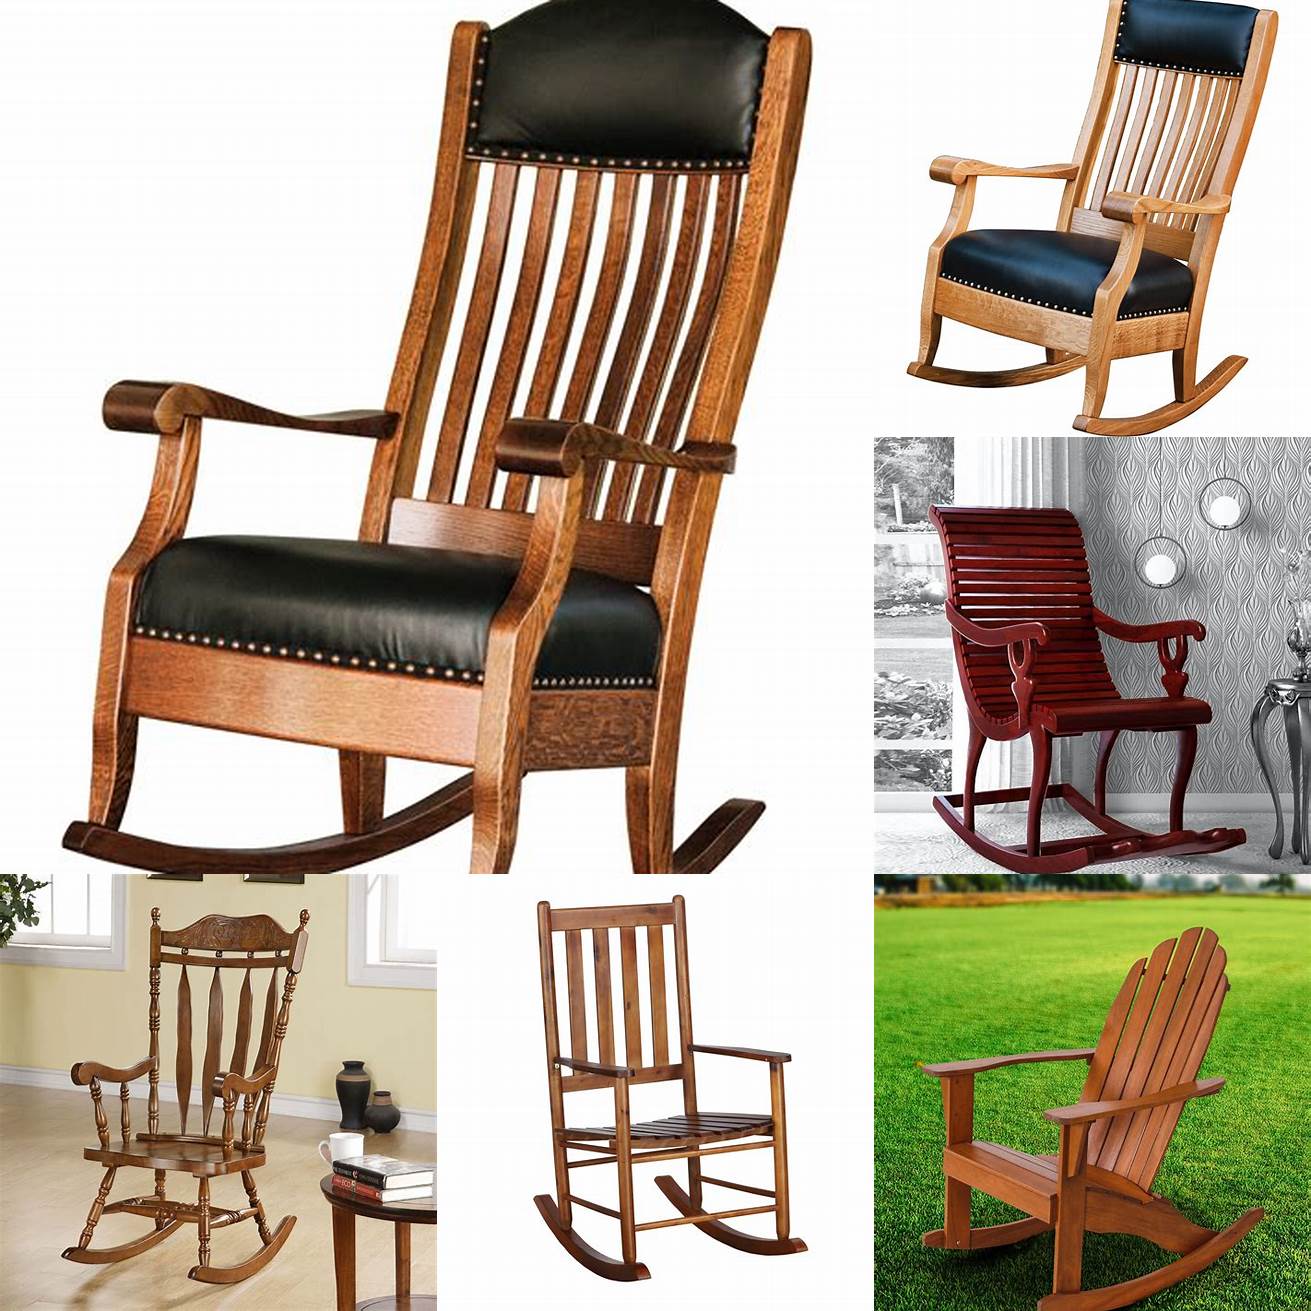 A Wooden Rocking Chair